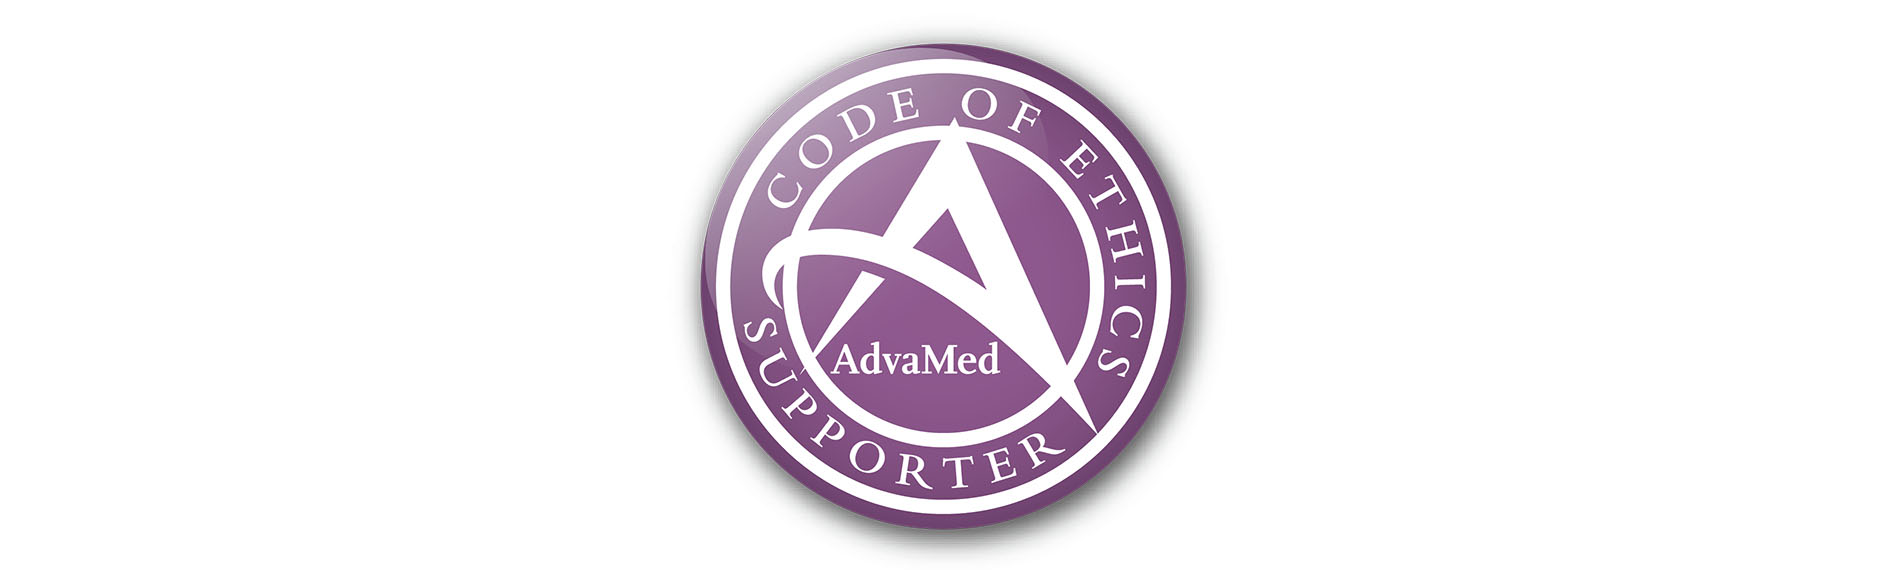 THD America adopts AdvaMed Code of Ethics